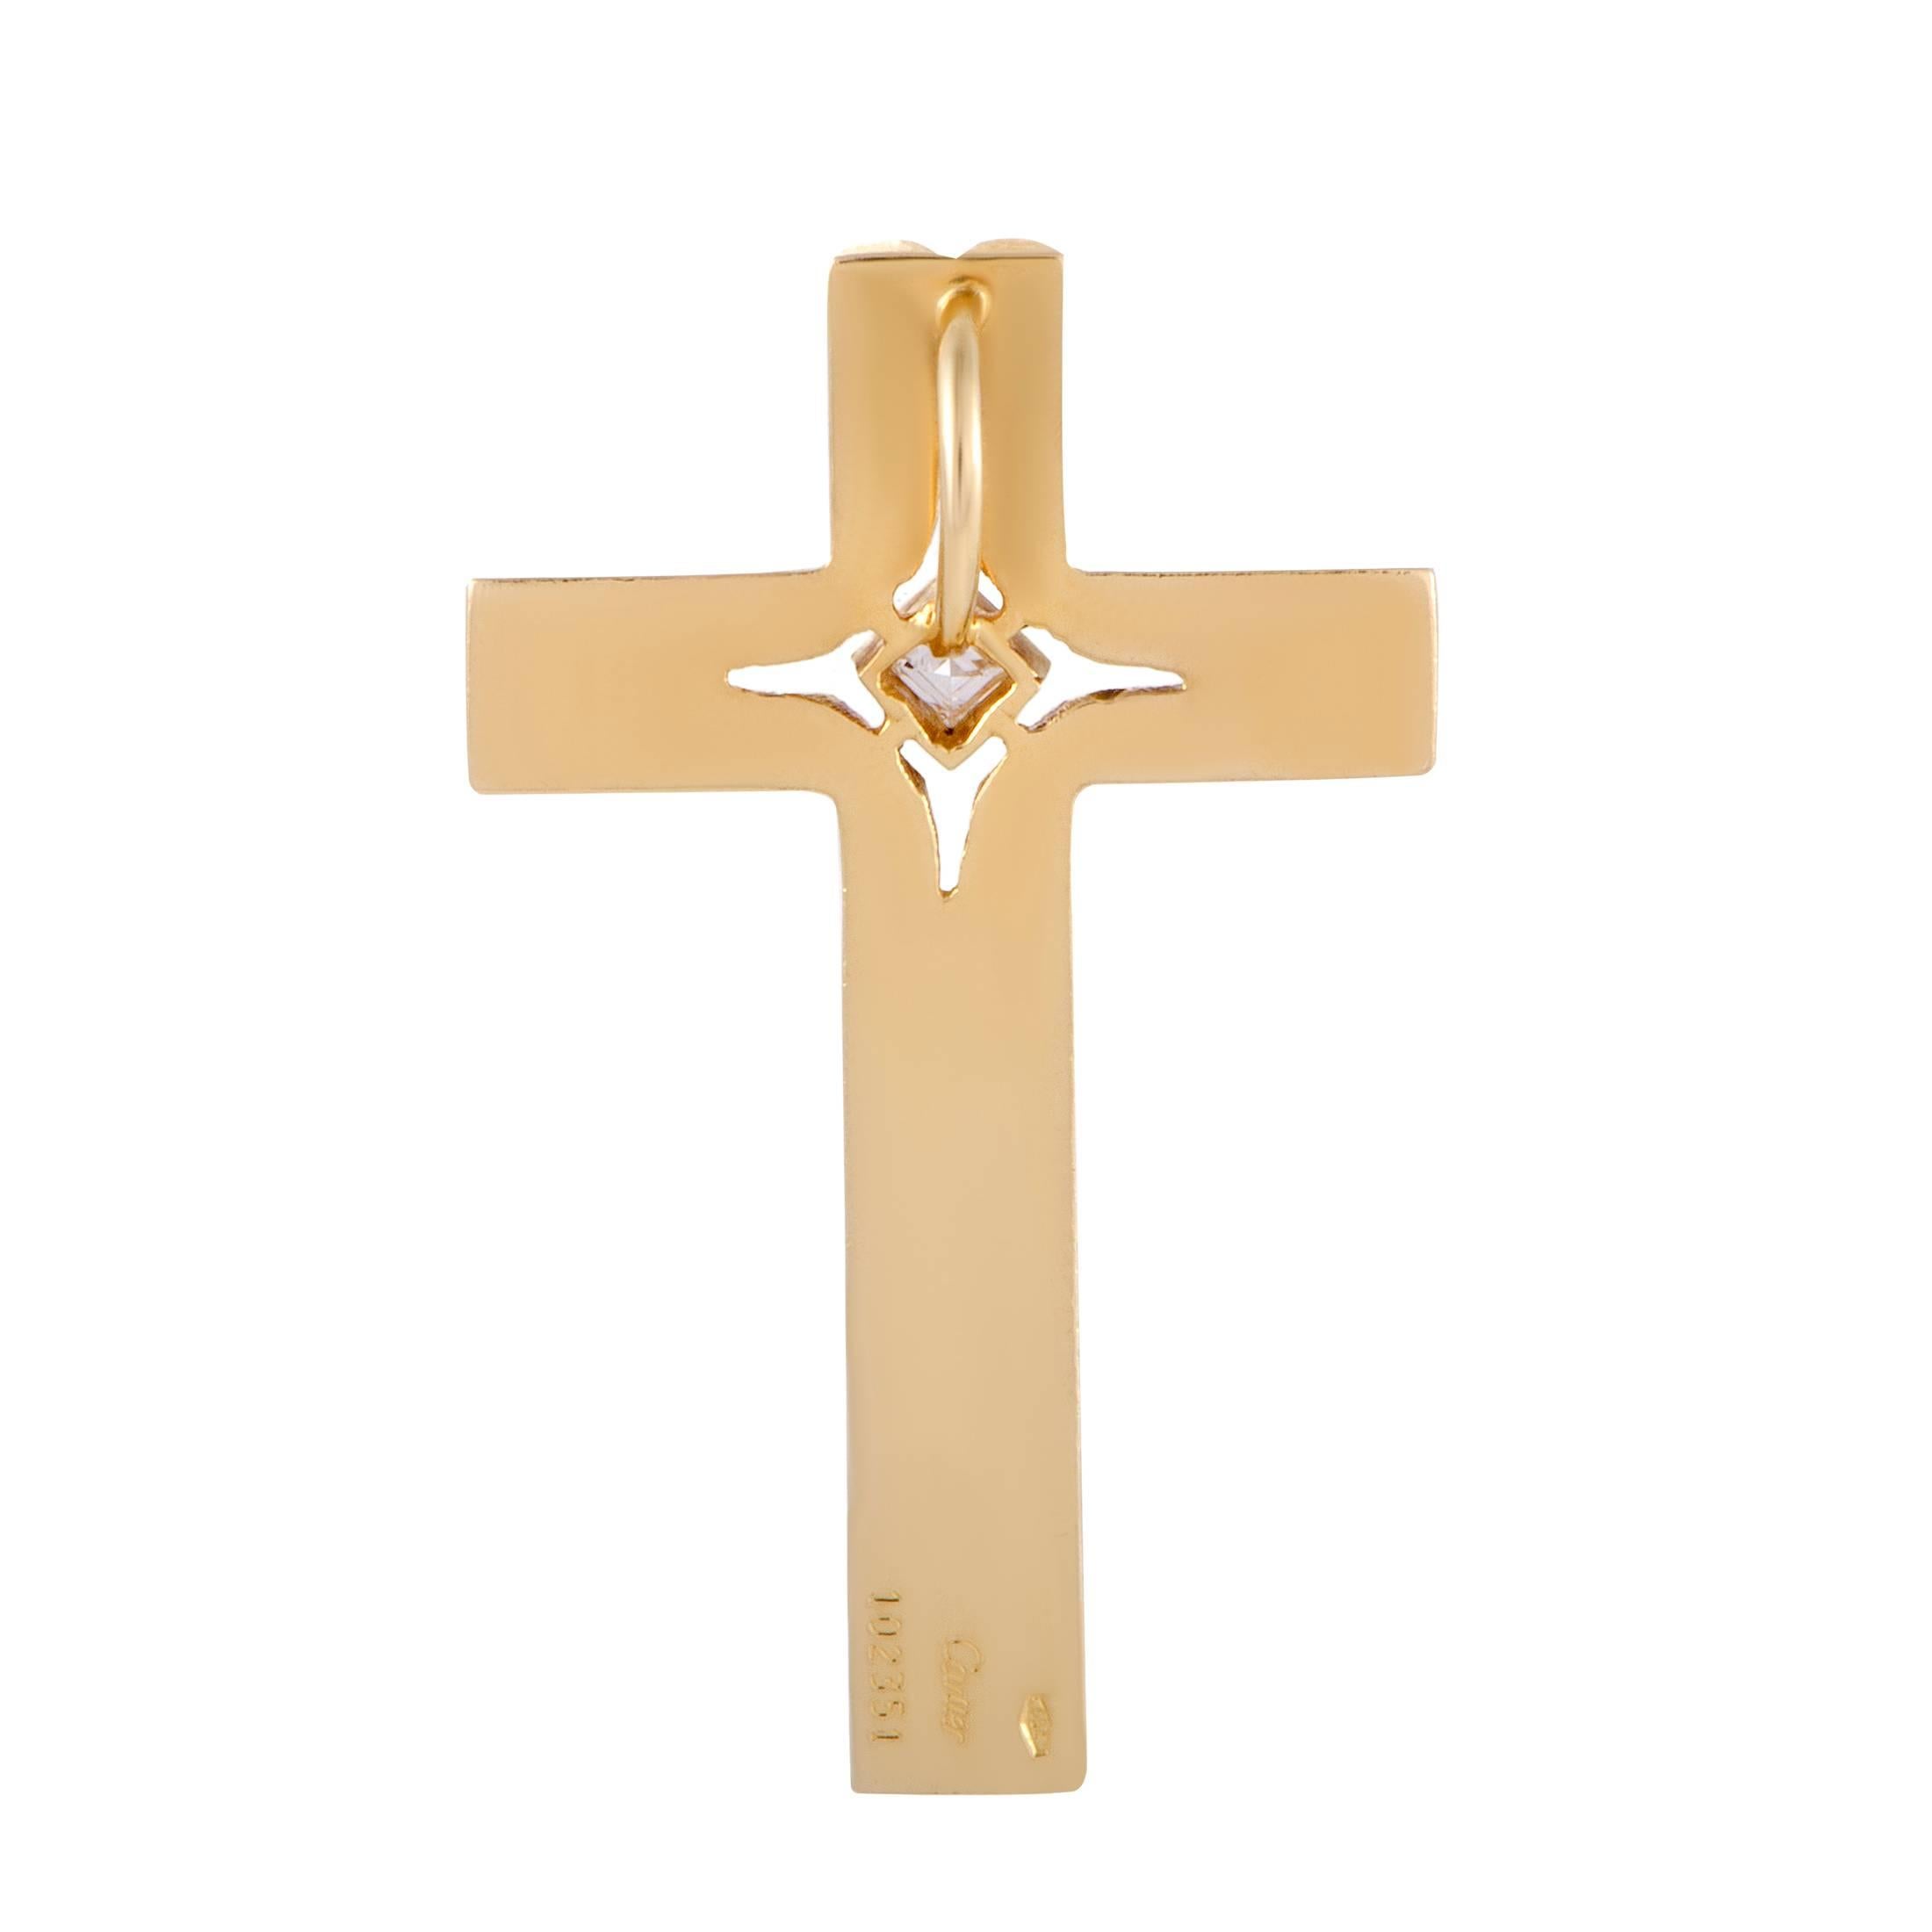 Presented in classy 18K yellow gold and designed in an incredibly sophisticated manner, this sublime cross pendant from Cartier is an epitome of elegance. The pendant is set with a colorless (grade F) diamond of VVS clarity that weighs 0.15